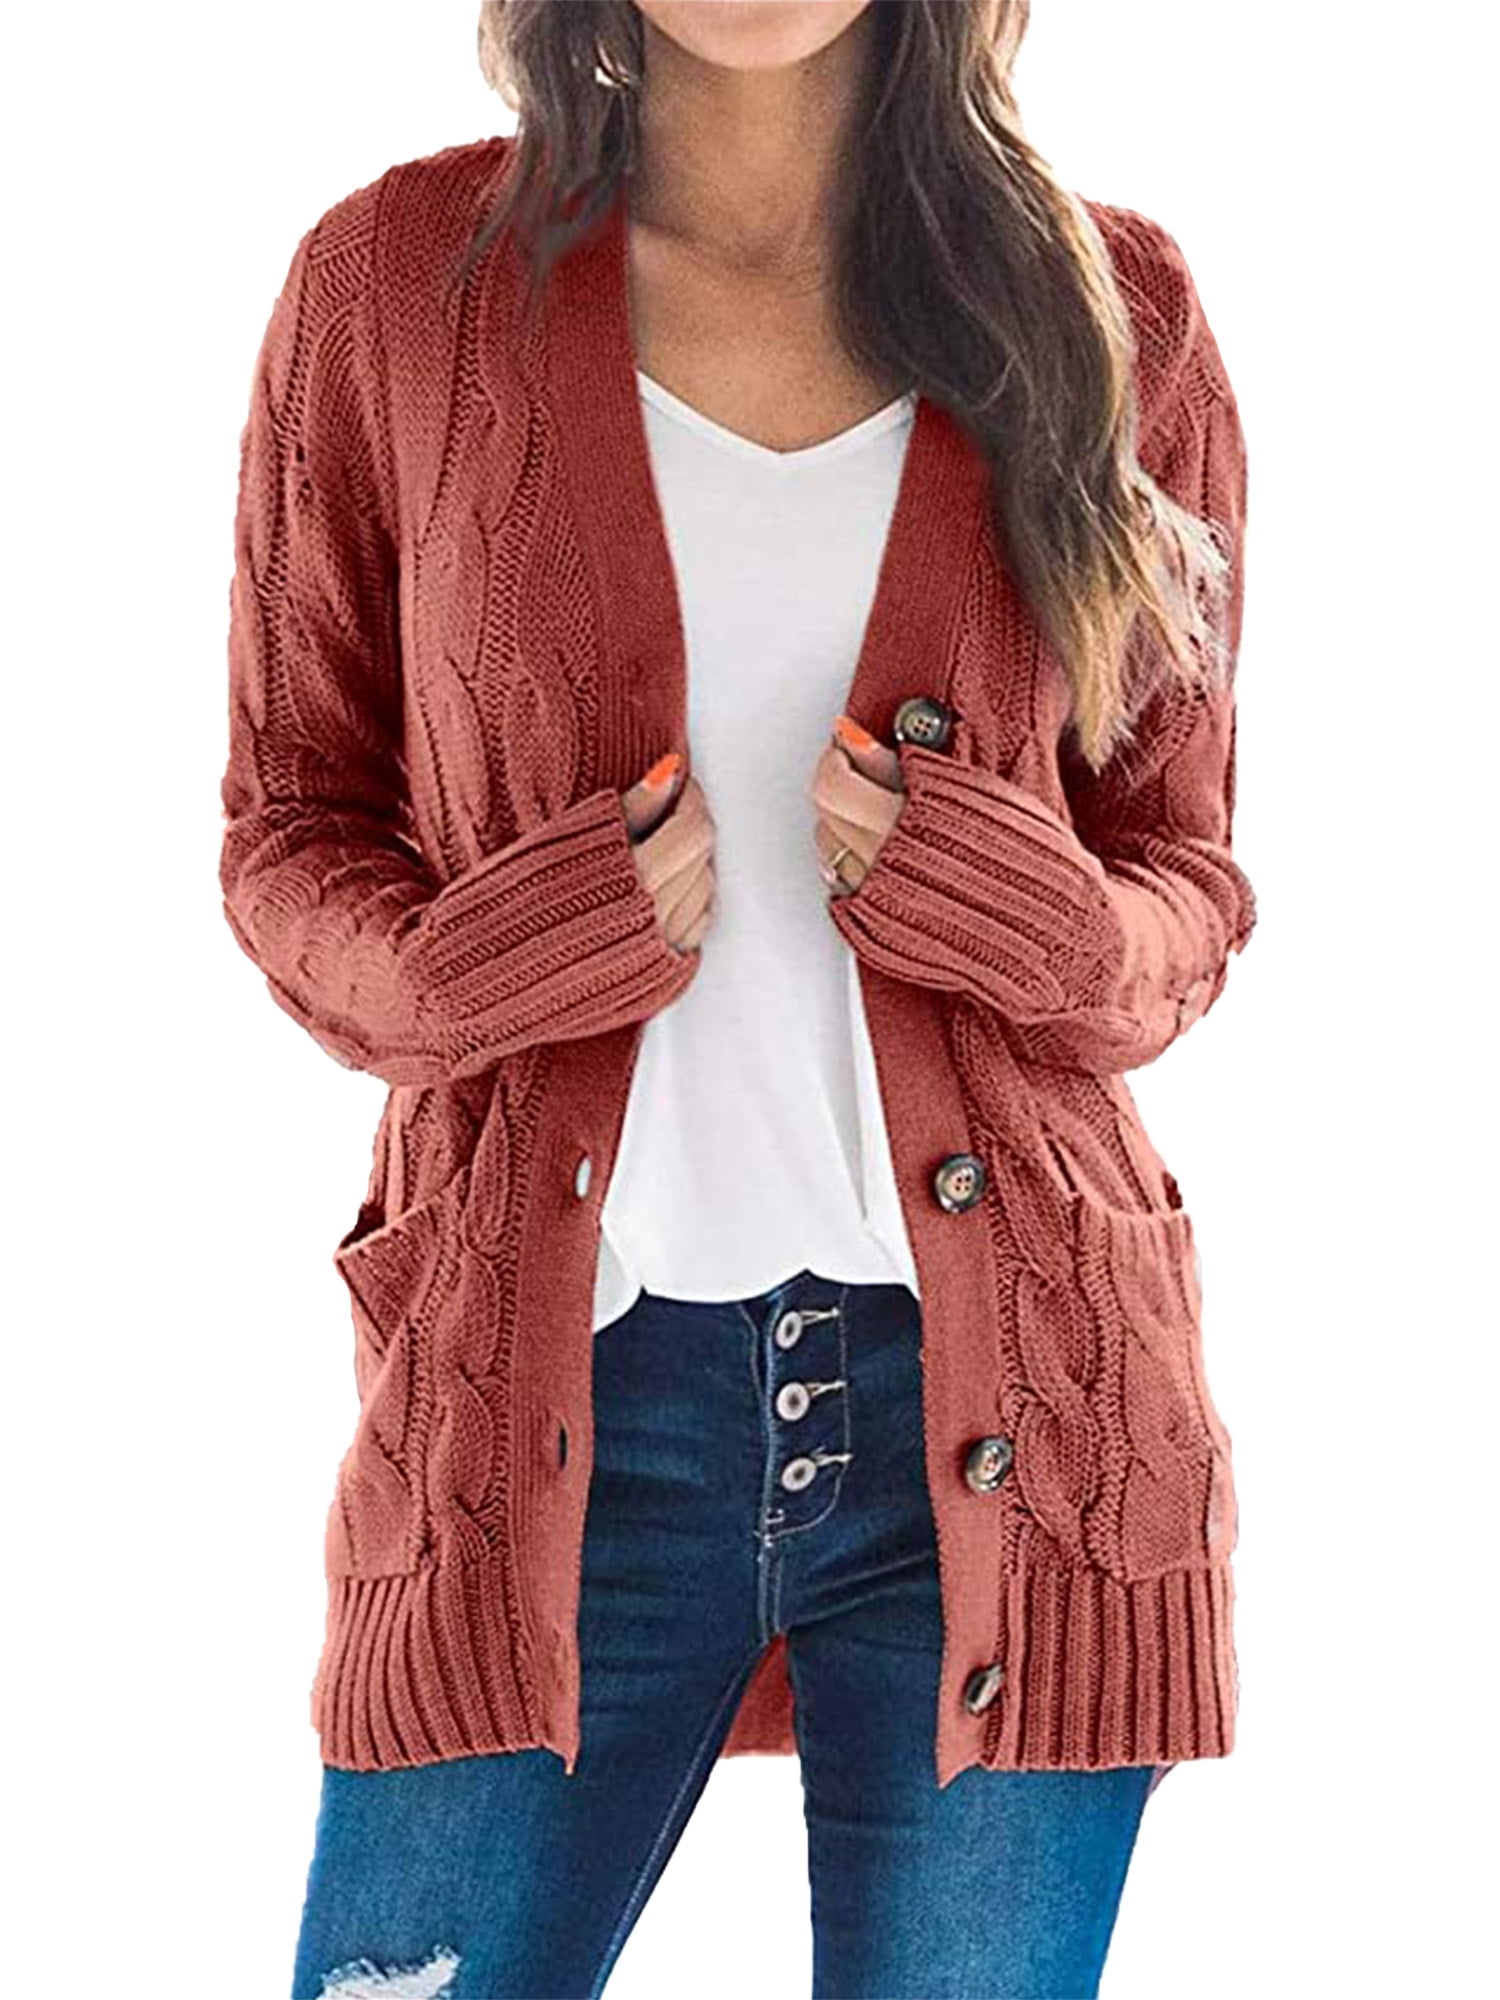 Baijiaye Open Front Cardigans Womens Baggy Knit Long Jumpers Jacket Lady Oversized Solid Slouchy Sweater Coat